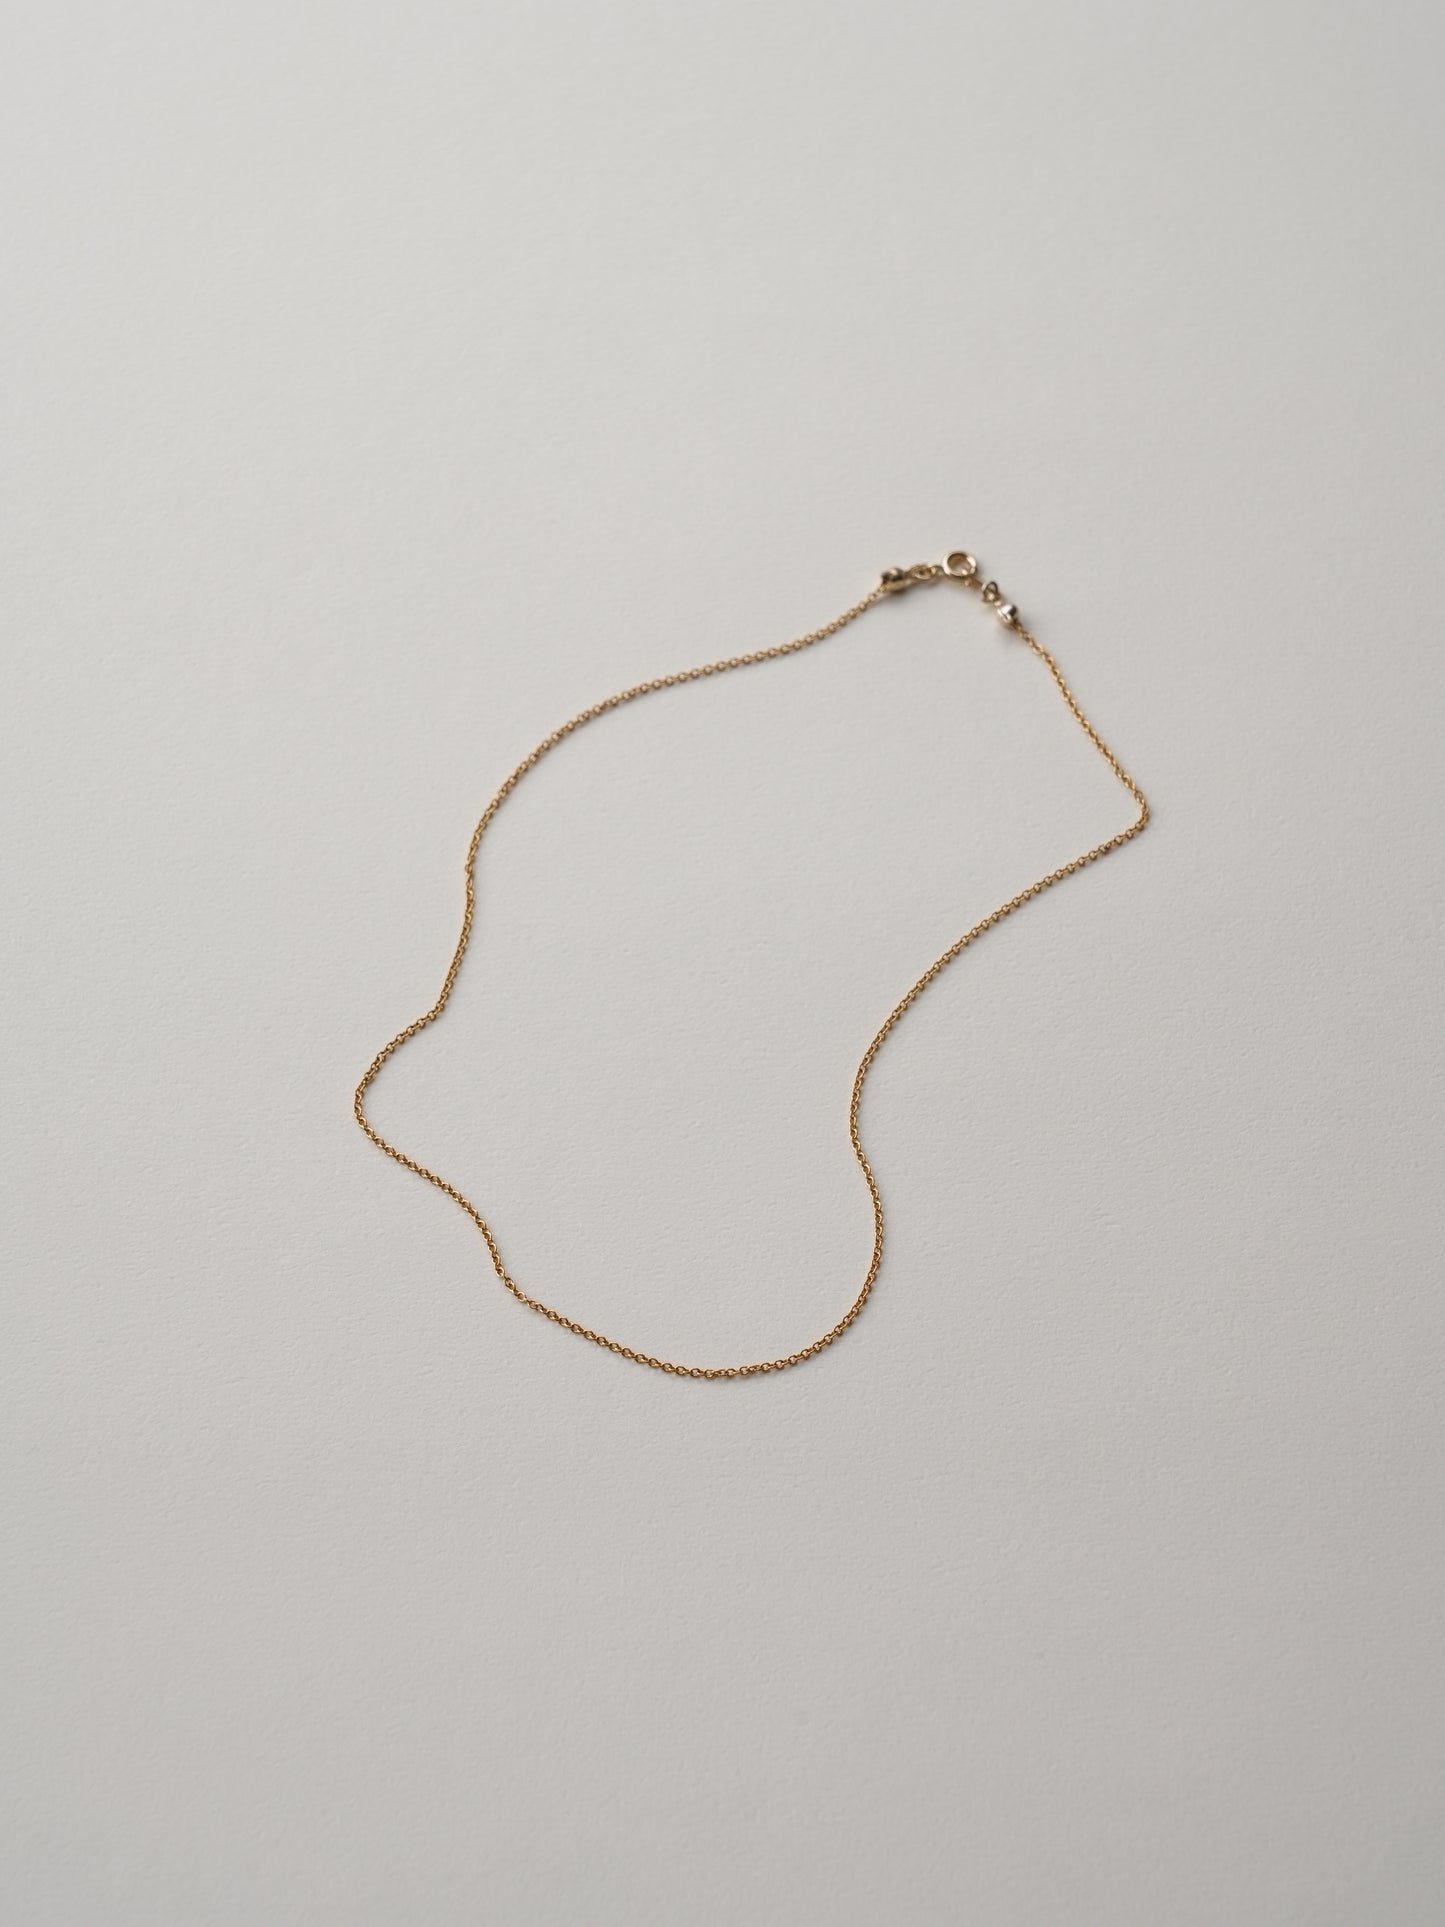 Rond chain necklace / 316L(金属アレルギー対応)